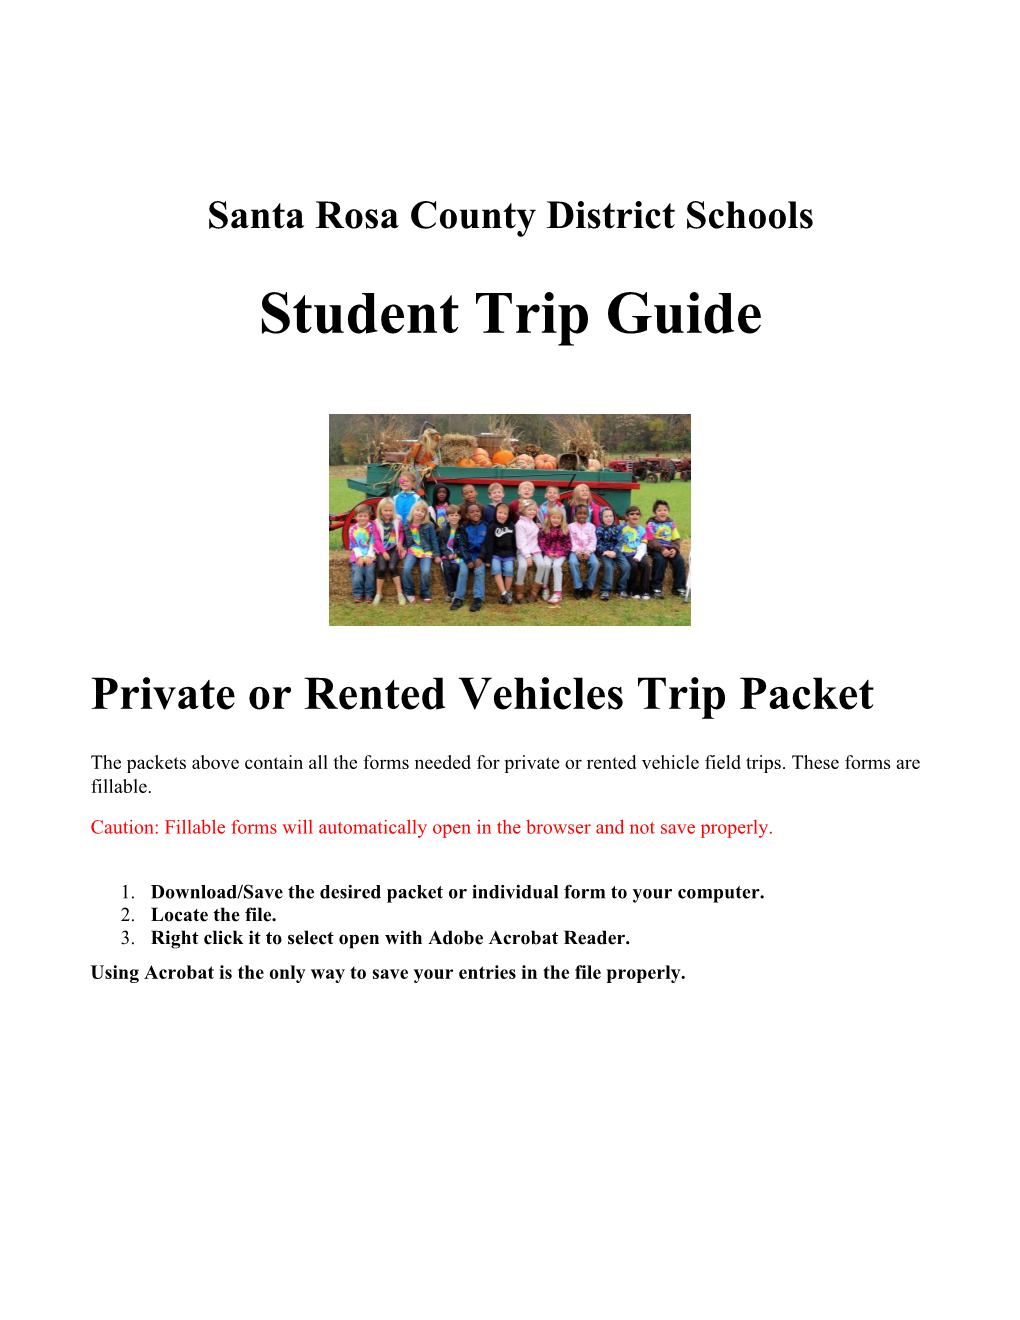 Student Trip Guide